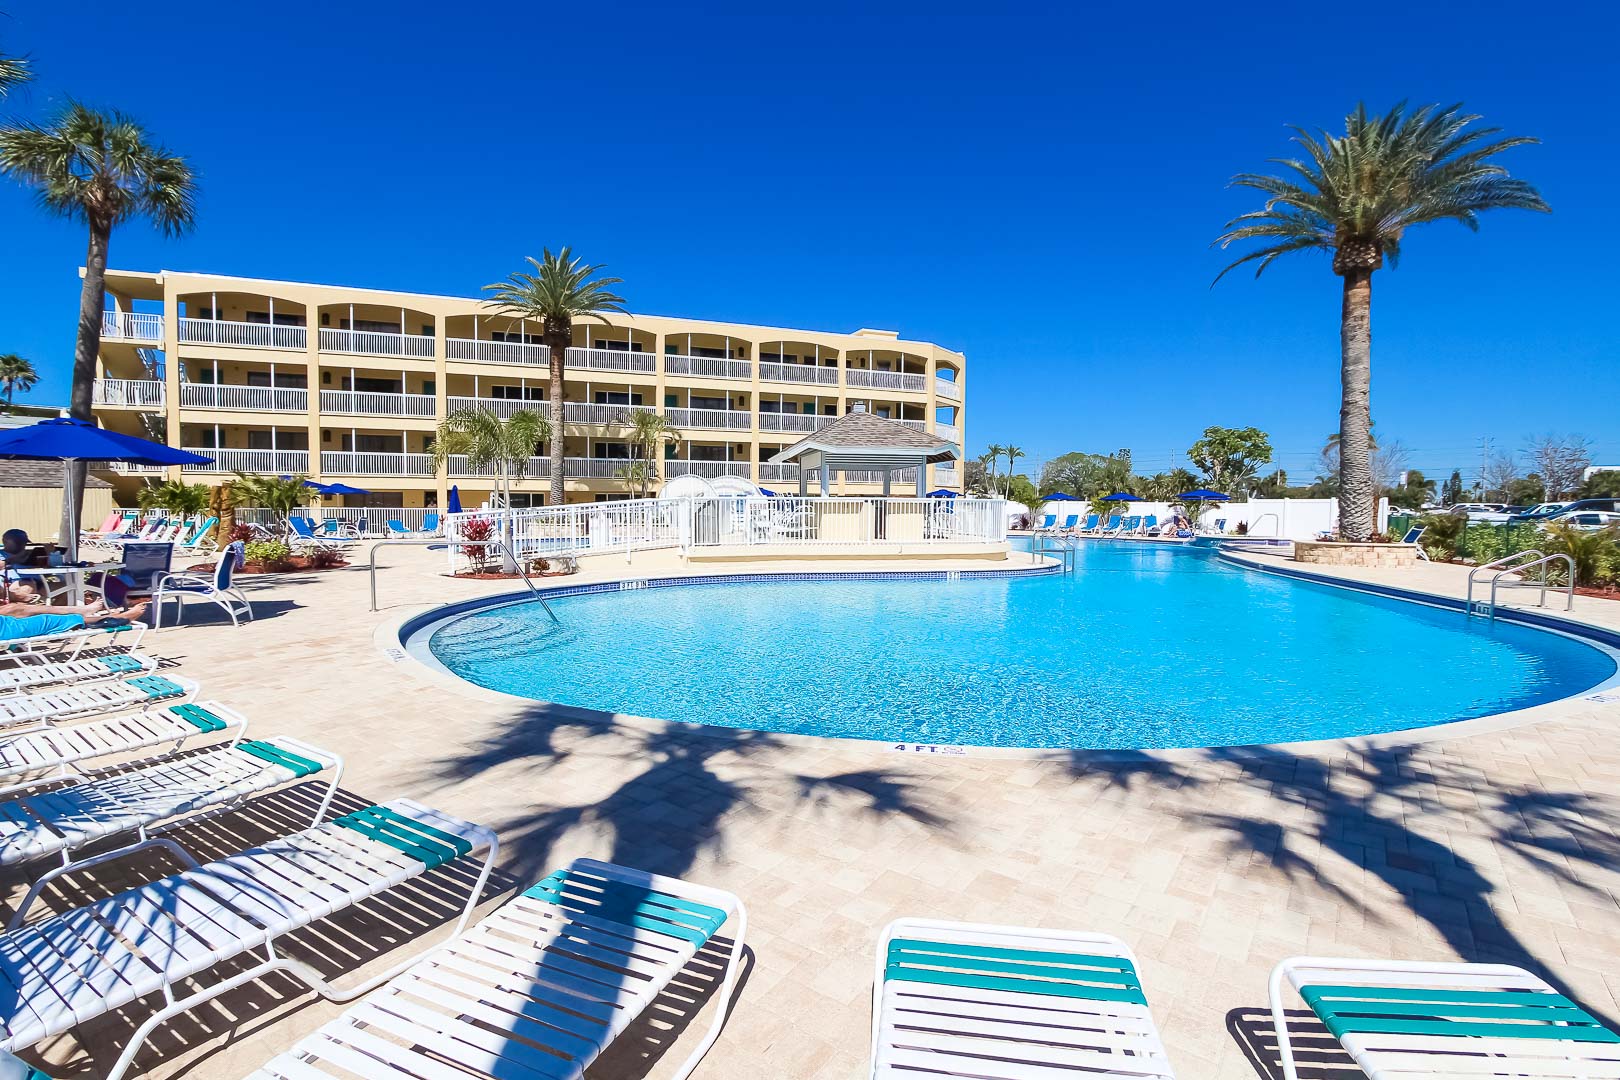 A relaxing view of the outdoor swimming pool at VRI's Coral Reef Beach Resort in St. Pete Beach, Florida.